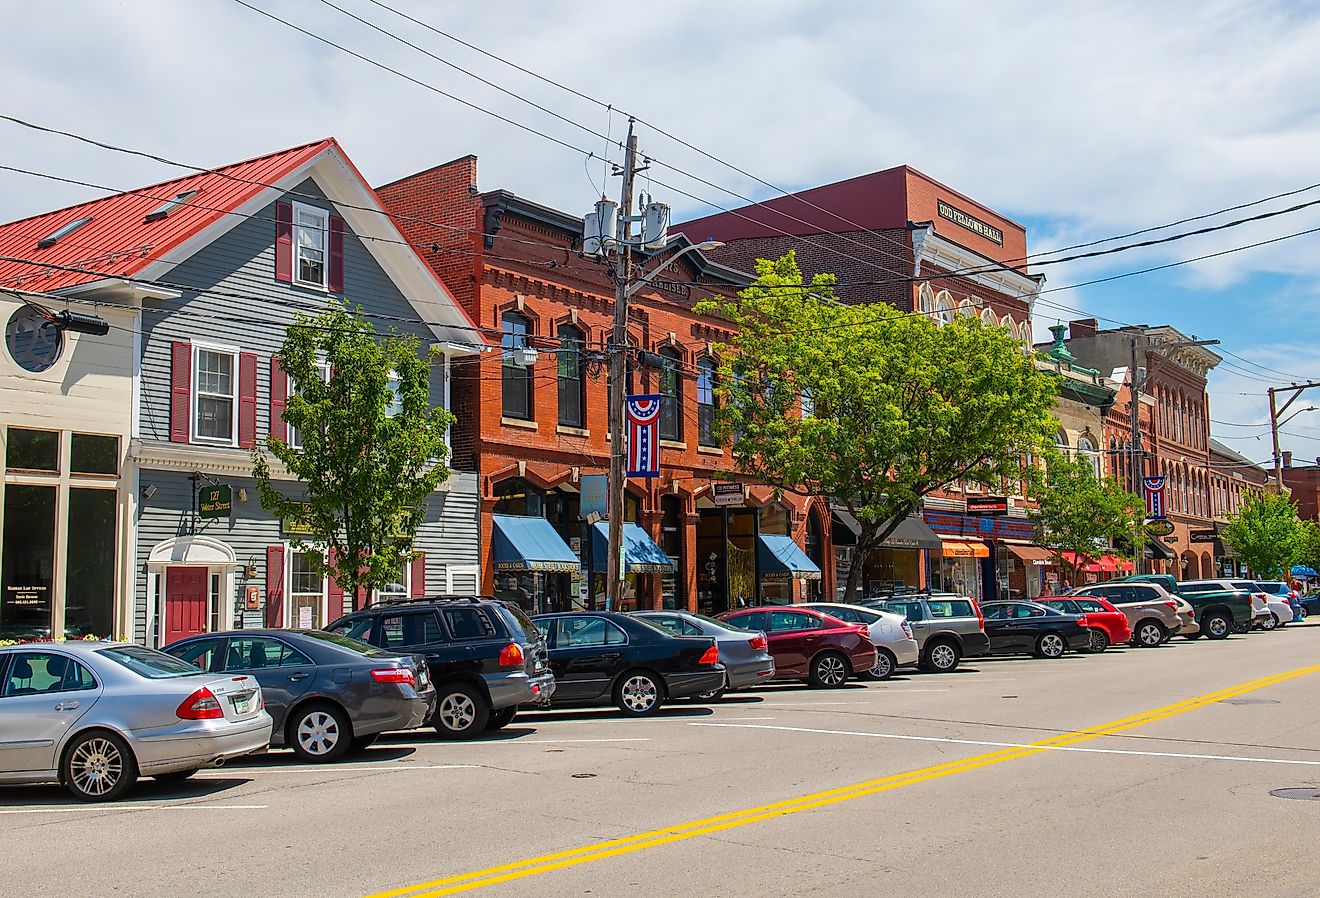 Historic Italianate style commercial building and Bandstand at Water Street and Front Street in historic town center of Exeter, New Hampshire. Image credit Wangkun Jia via stock.adobe.com